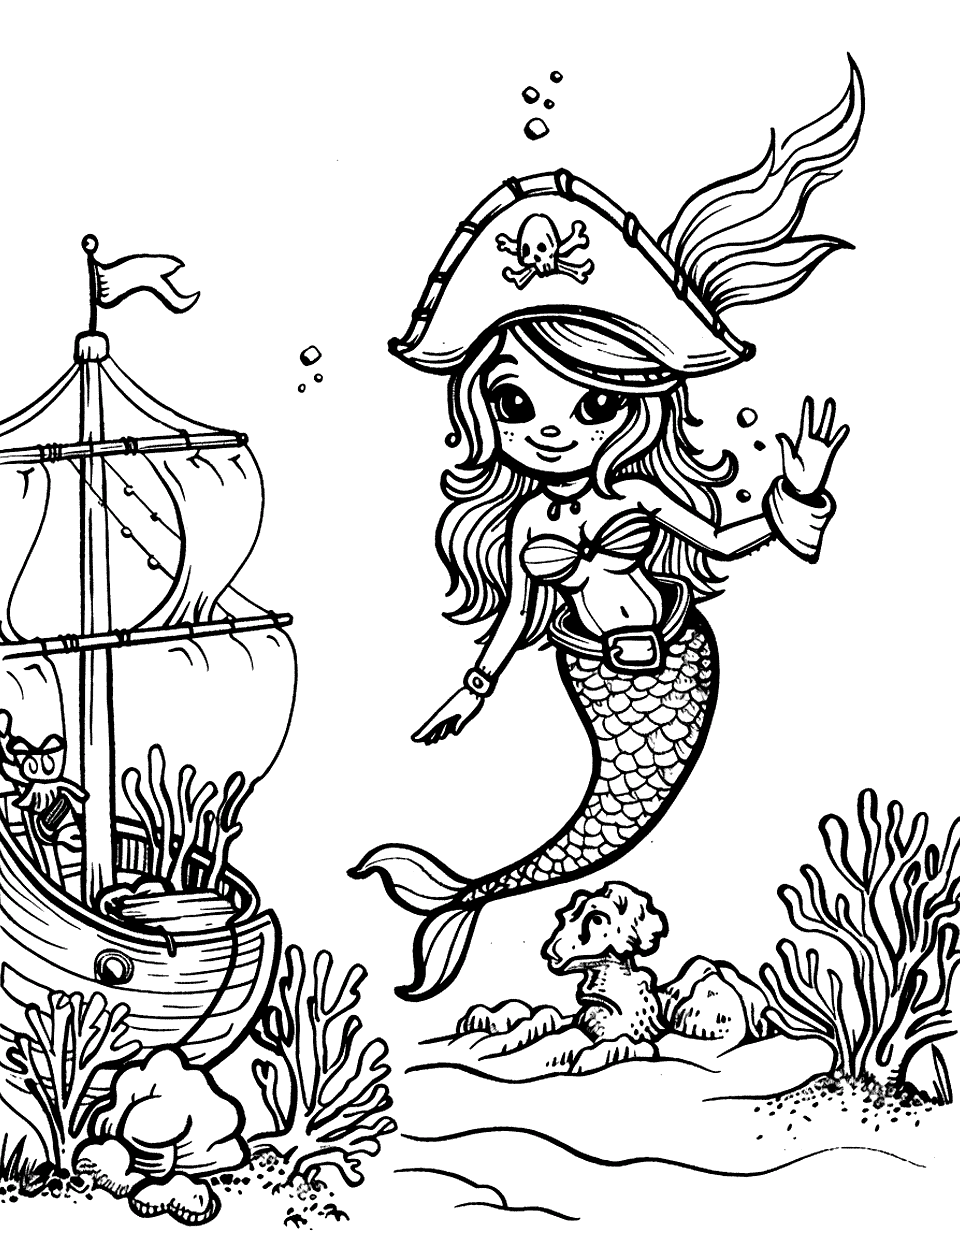 Mermaid Encounter Pirate Coloring Page - A pirate mermaid waving from her coral home.